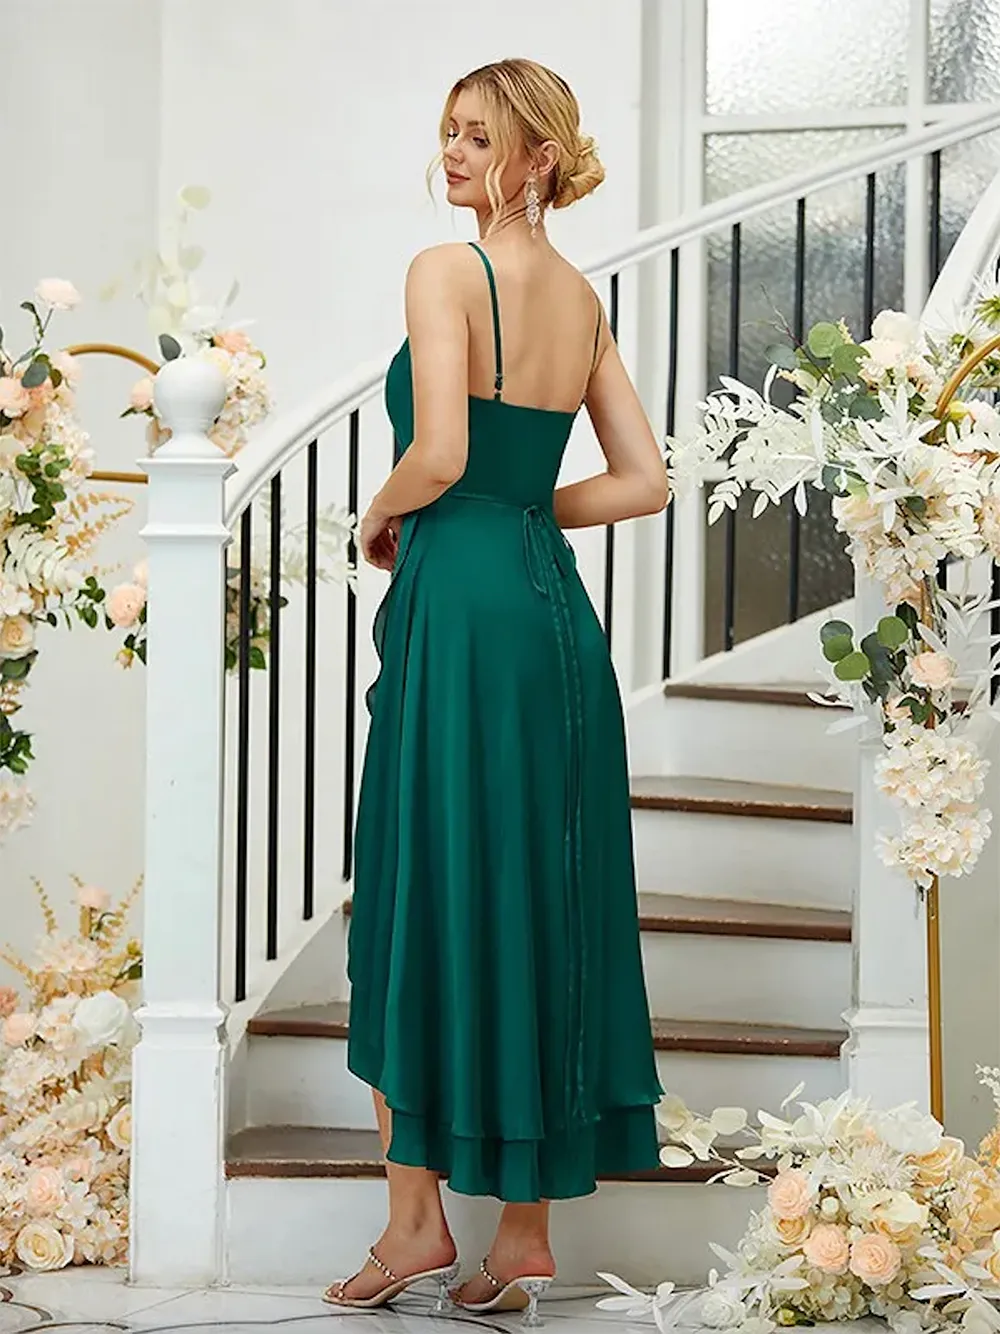 Green Asymmetrical Bridesmaid Dresses Spaghetti Strap Tiere High Low Wedding Guest Dress High Low Pleat Formal Party Gown